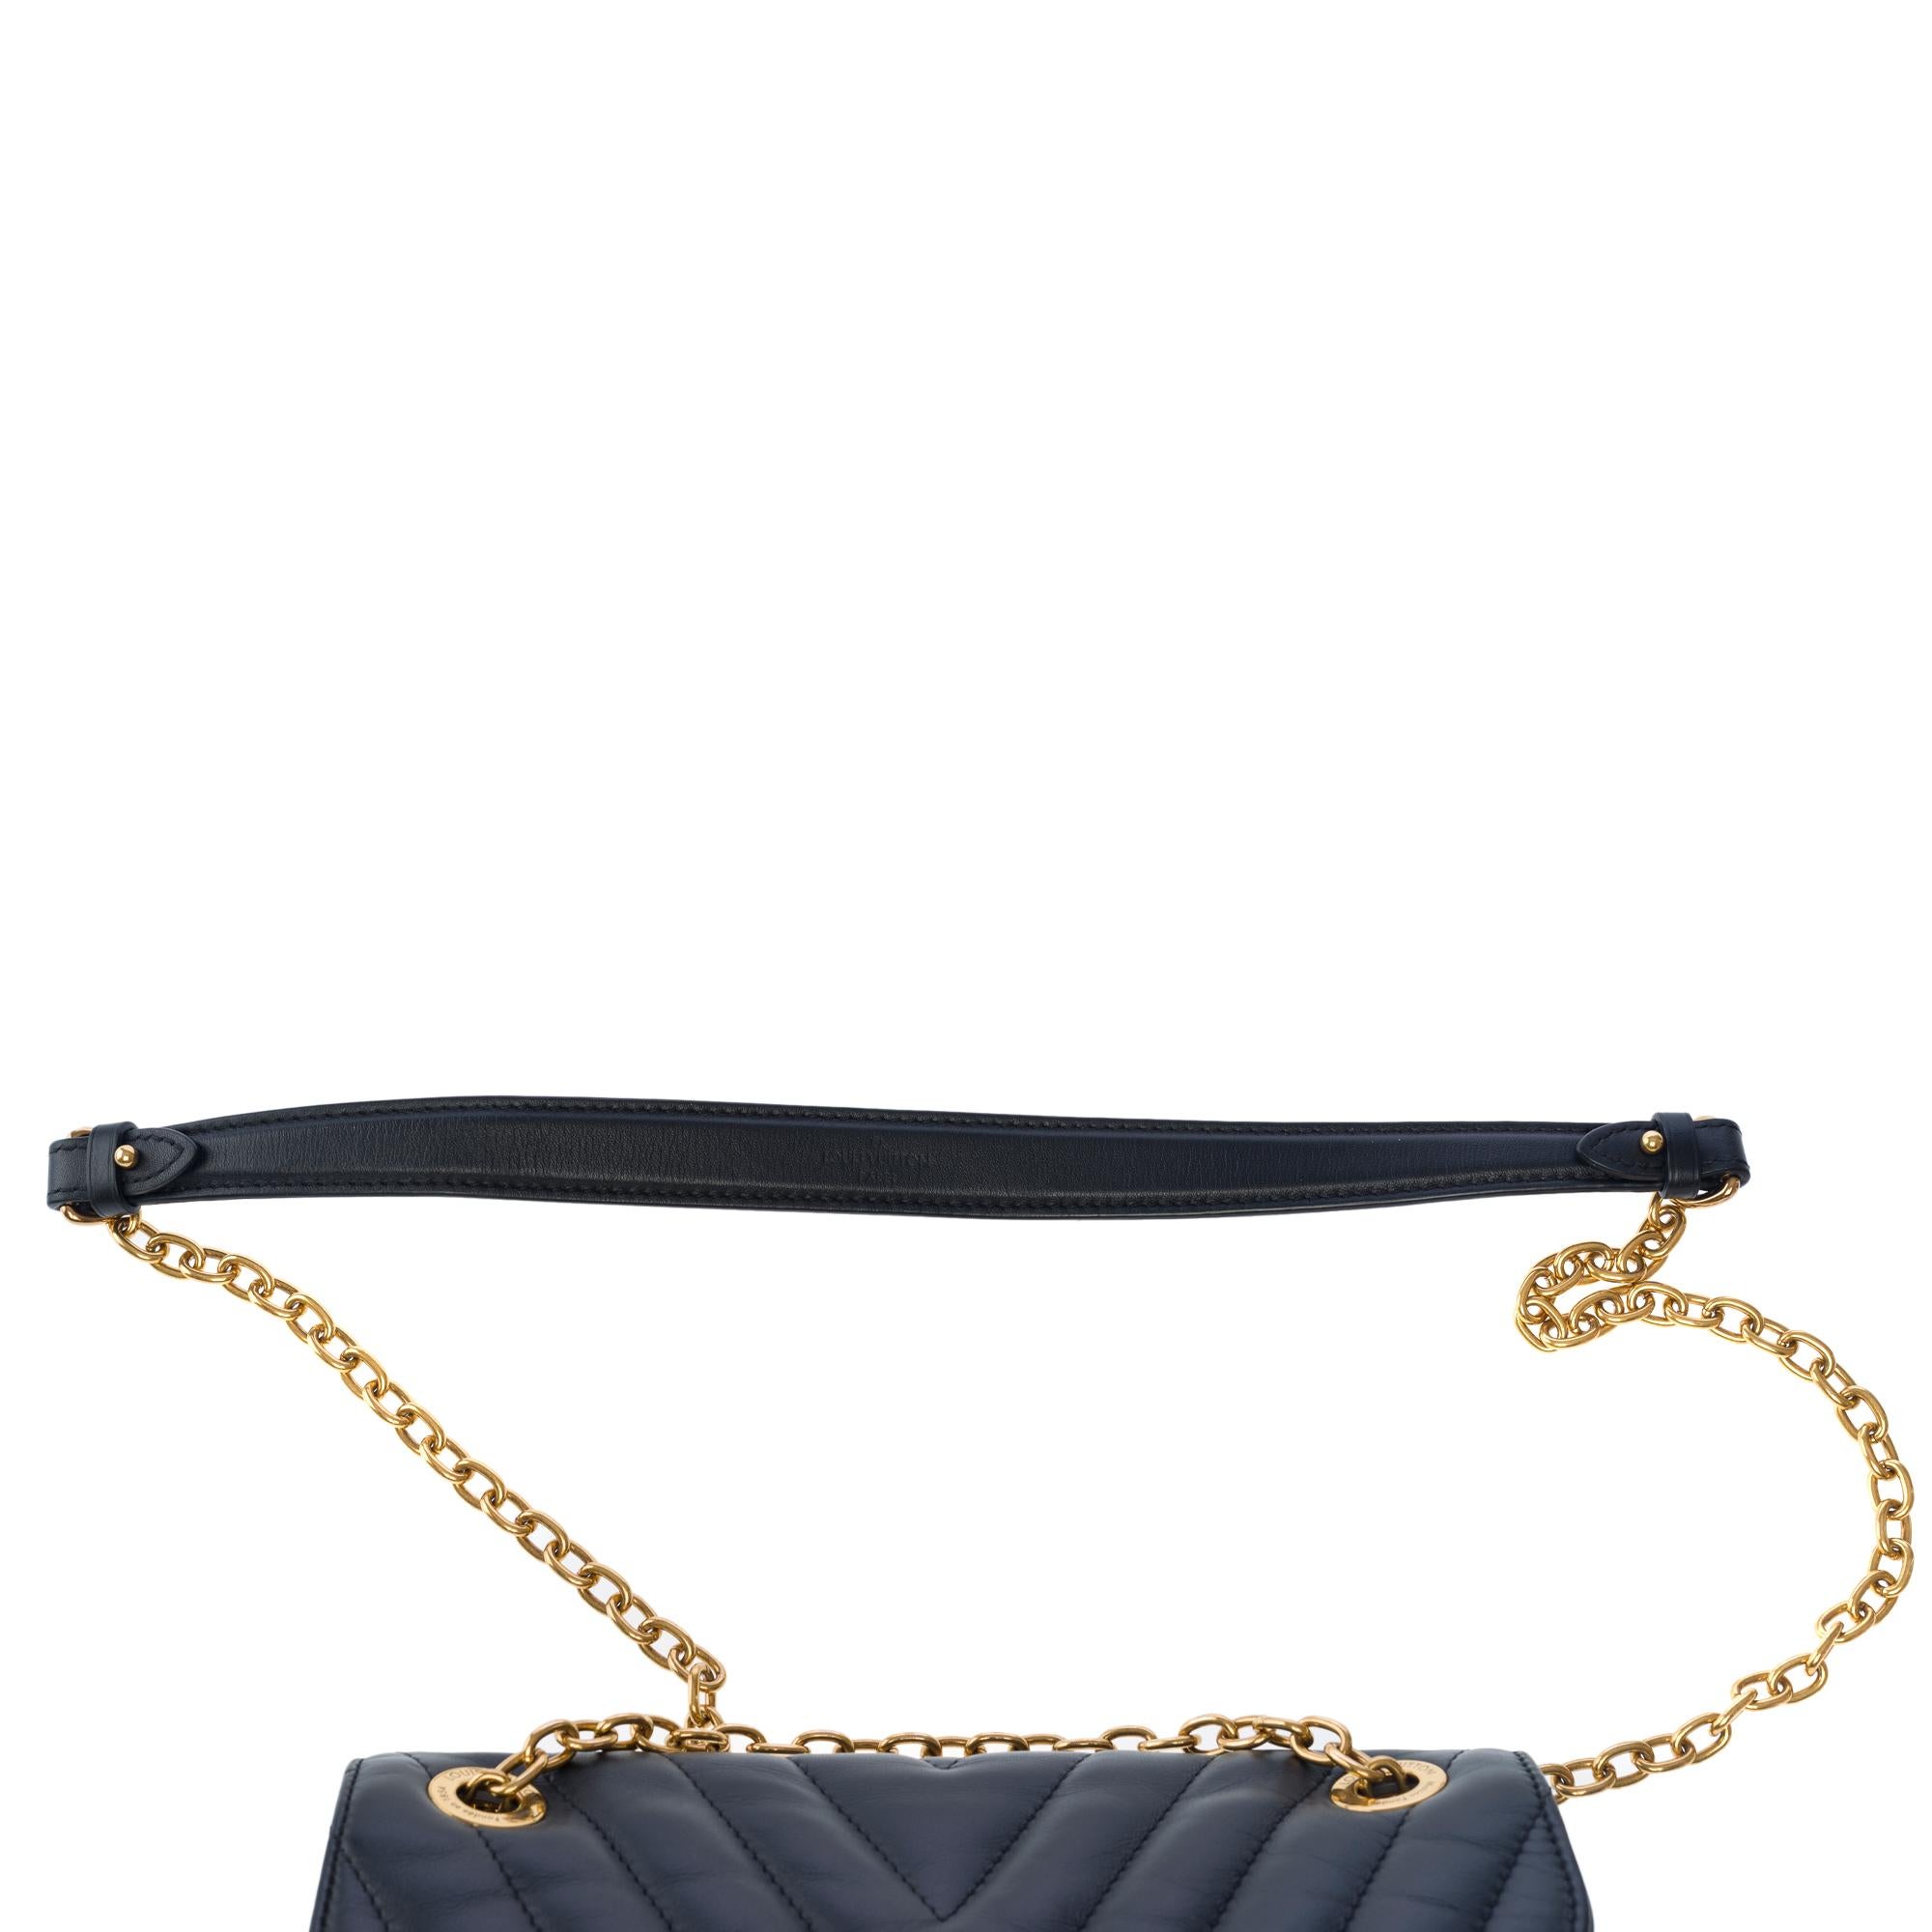 Louis Vuitton Wave shoulder bag in Black quilted calf leather, GHW 4